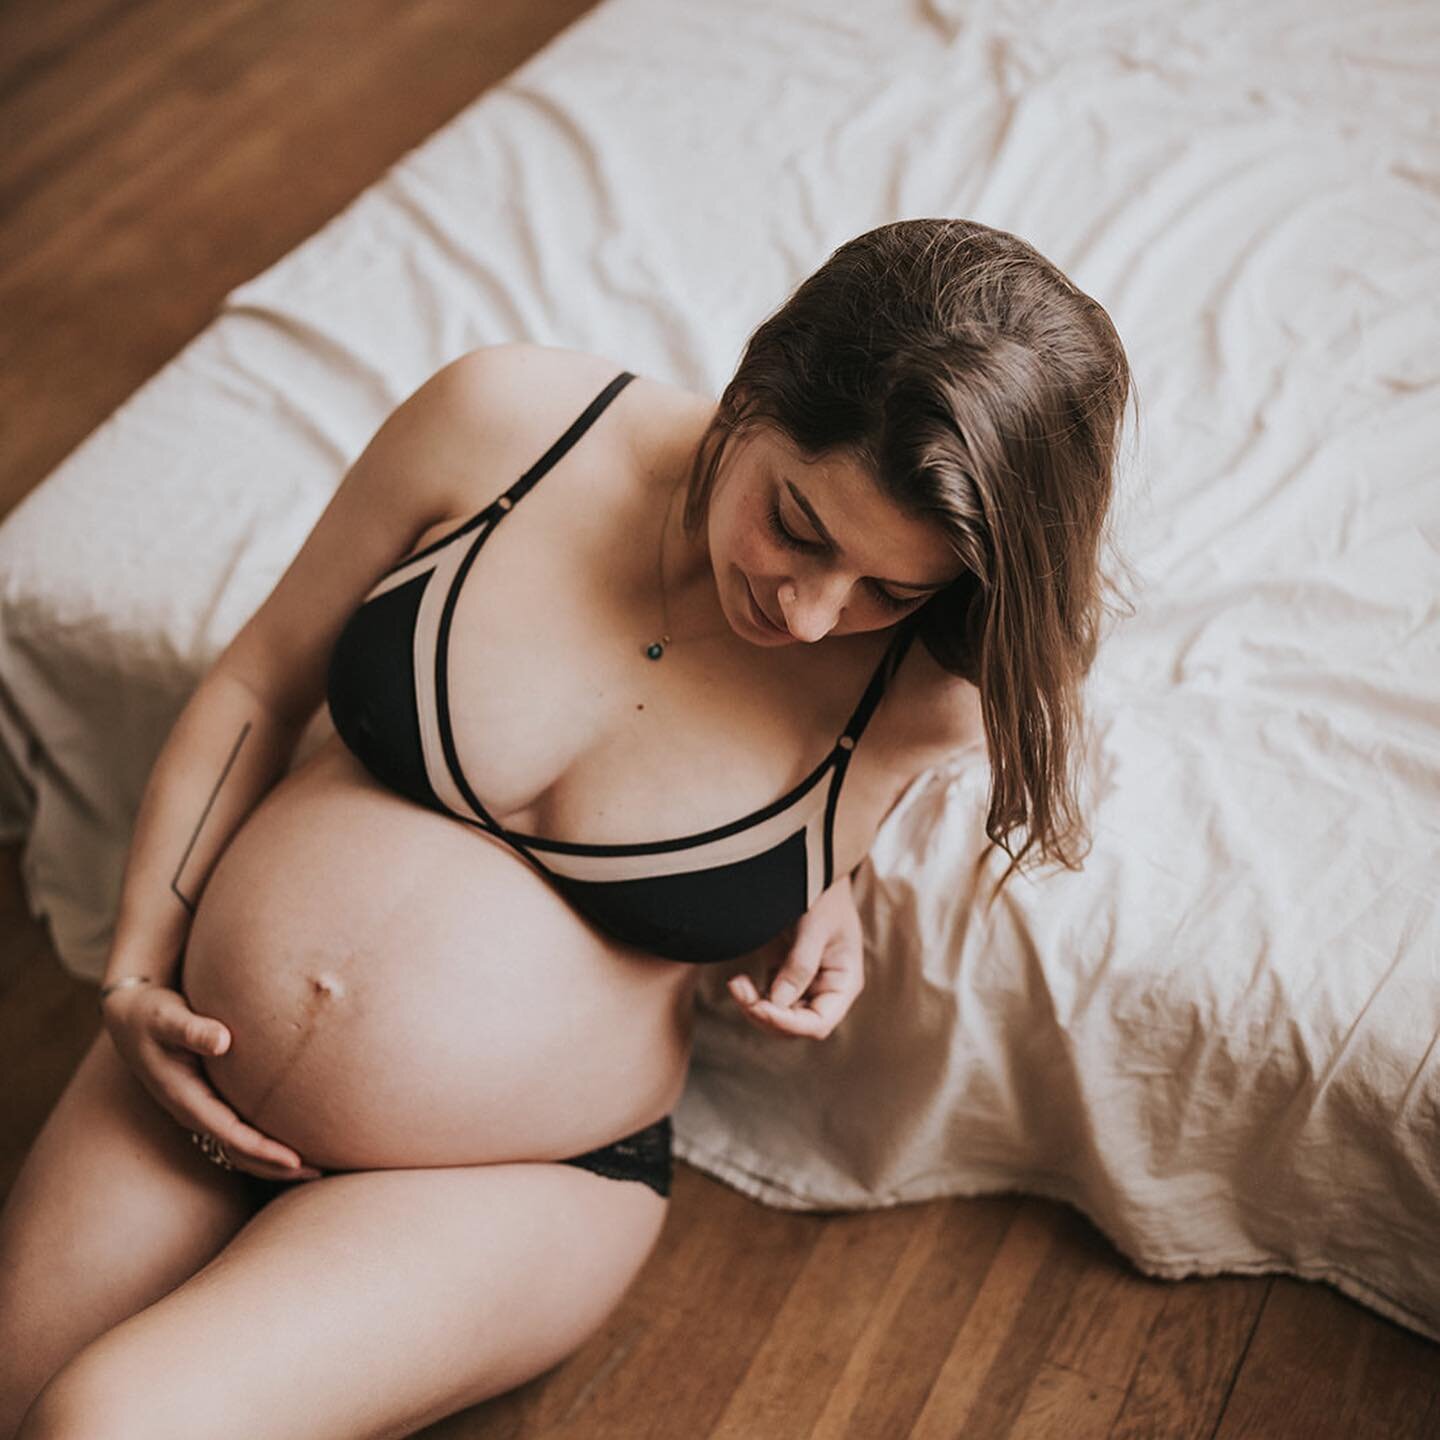 I&rsquo;ve been RICH in maternity boudoir and it&rsquo;s quickly become my absolute favorite thing to shoot. How perfect was @theapicard baby belly? Not quite as perfect as their beautiful baby is!